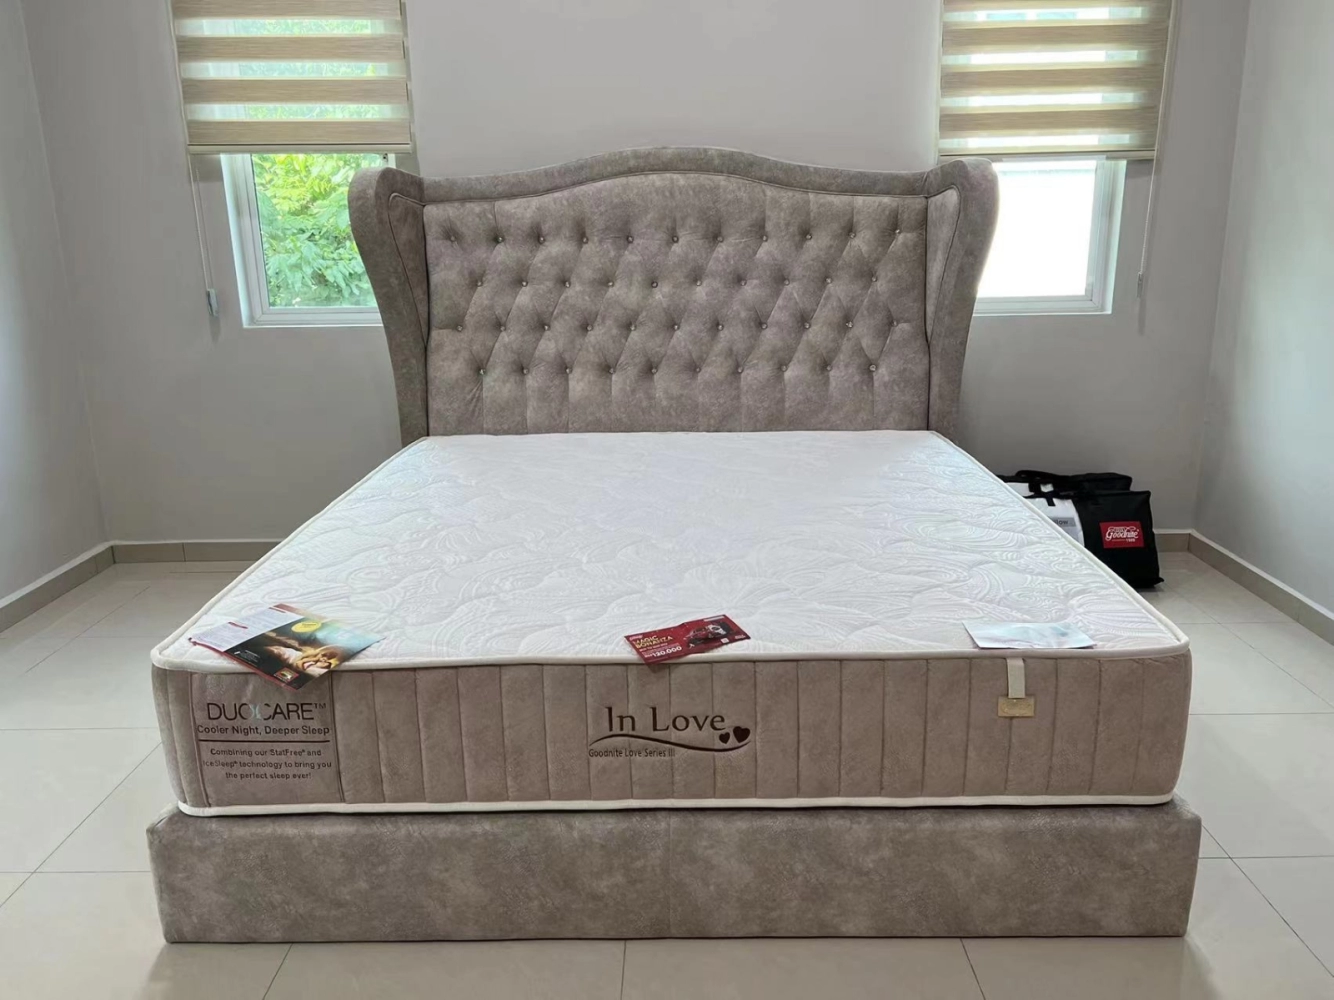  Goodnite In Love Series 3 DuoCare Statfree Anti Static + IceSleep Cooling  In Love 3 Zone Pocket Spring Mattress (11 Inch) + Eco Foam Latex 3 Zone Pocket Spring Mattress